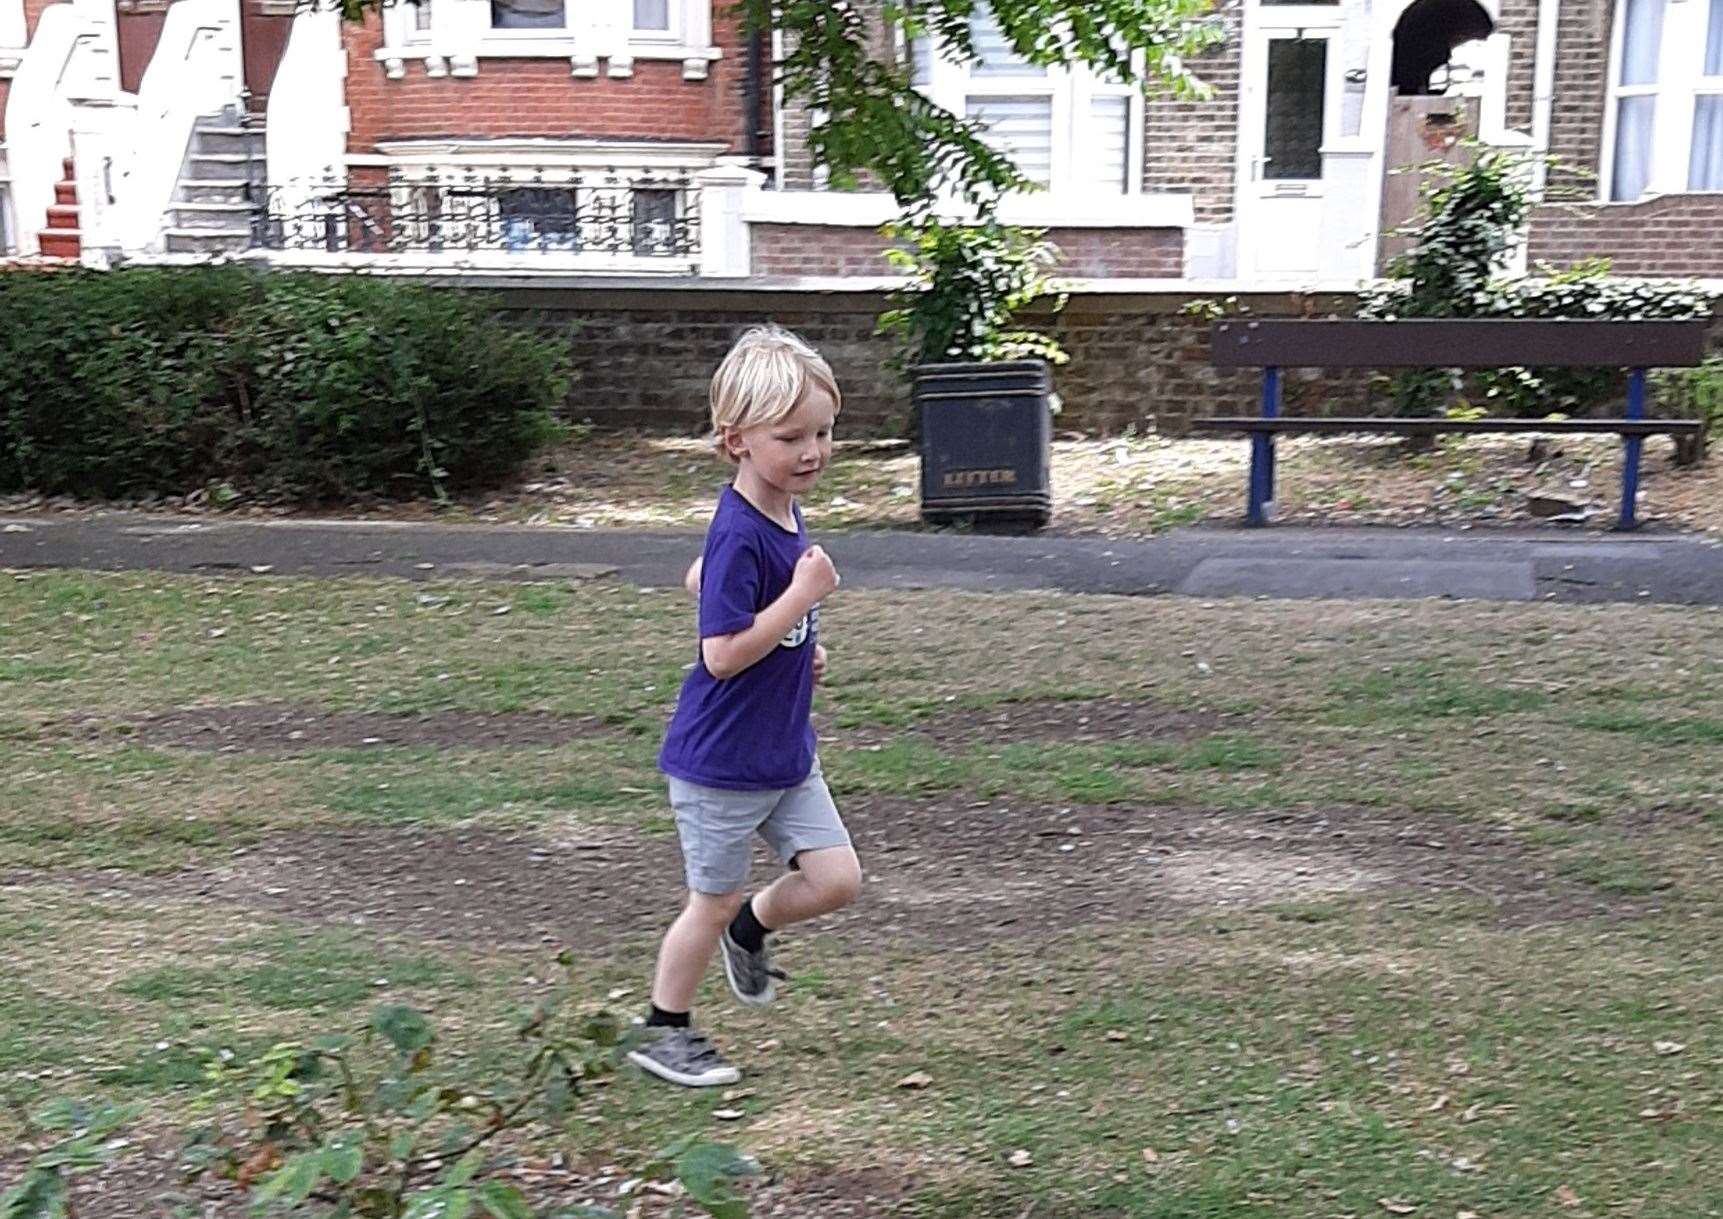 Running wild: Four-year-old Rory Newing from Sheppey was born with a deformed heart and saved by surgeons at Great Ormond Street Hospital. He is now repaying that debt by running 31k around Sheerness for the London children's hospital